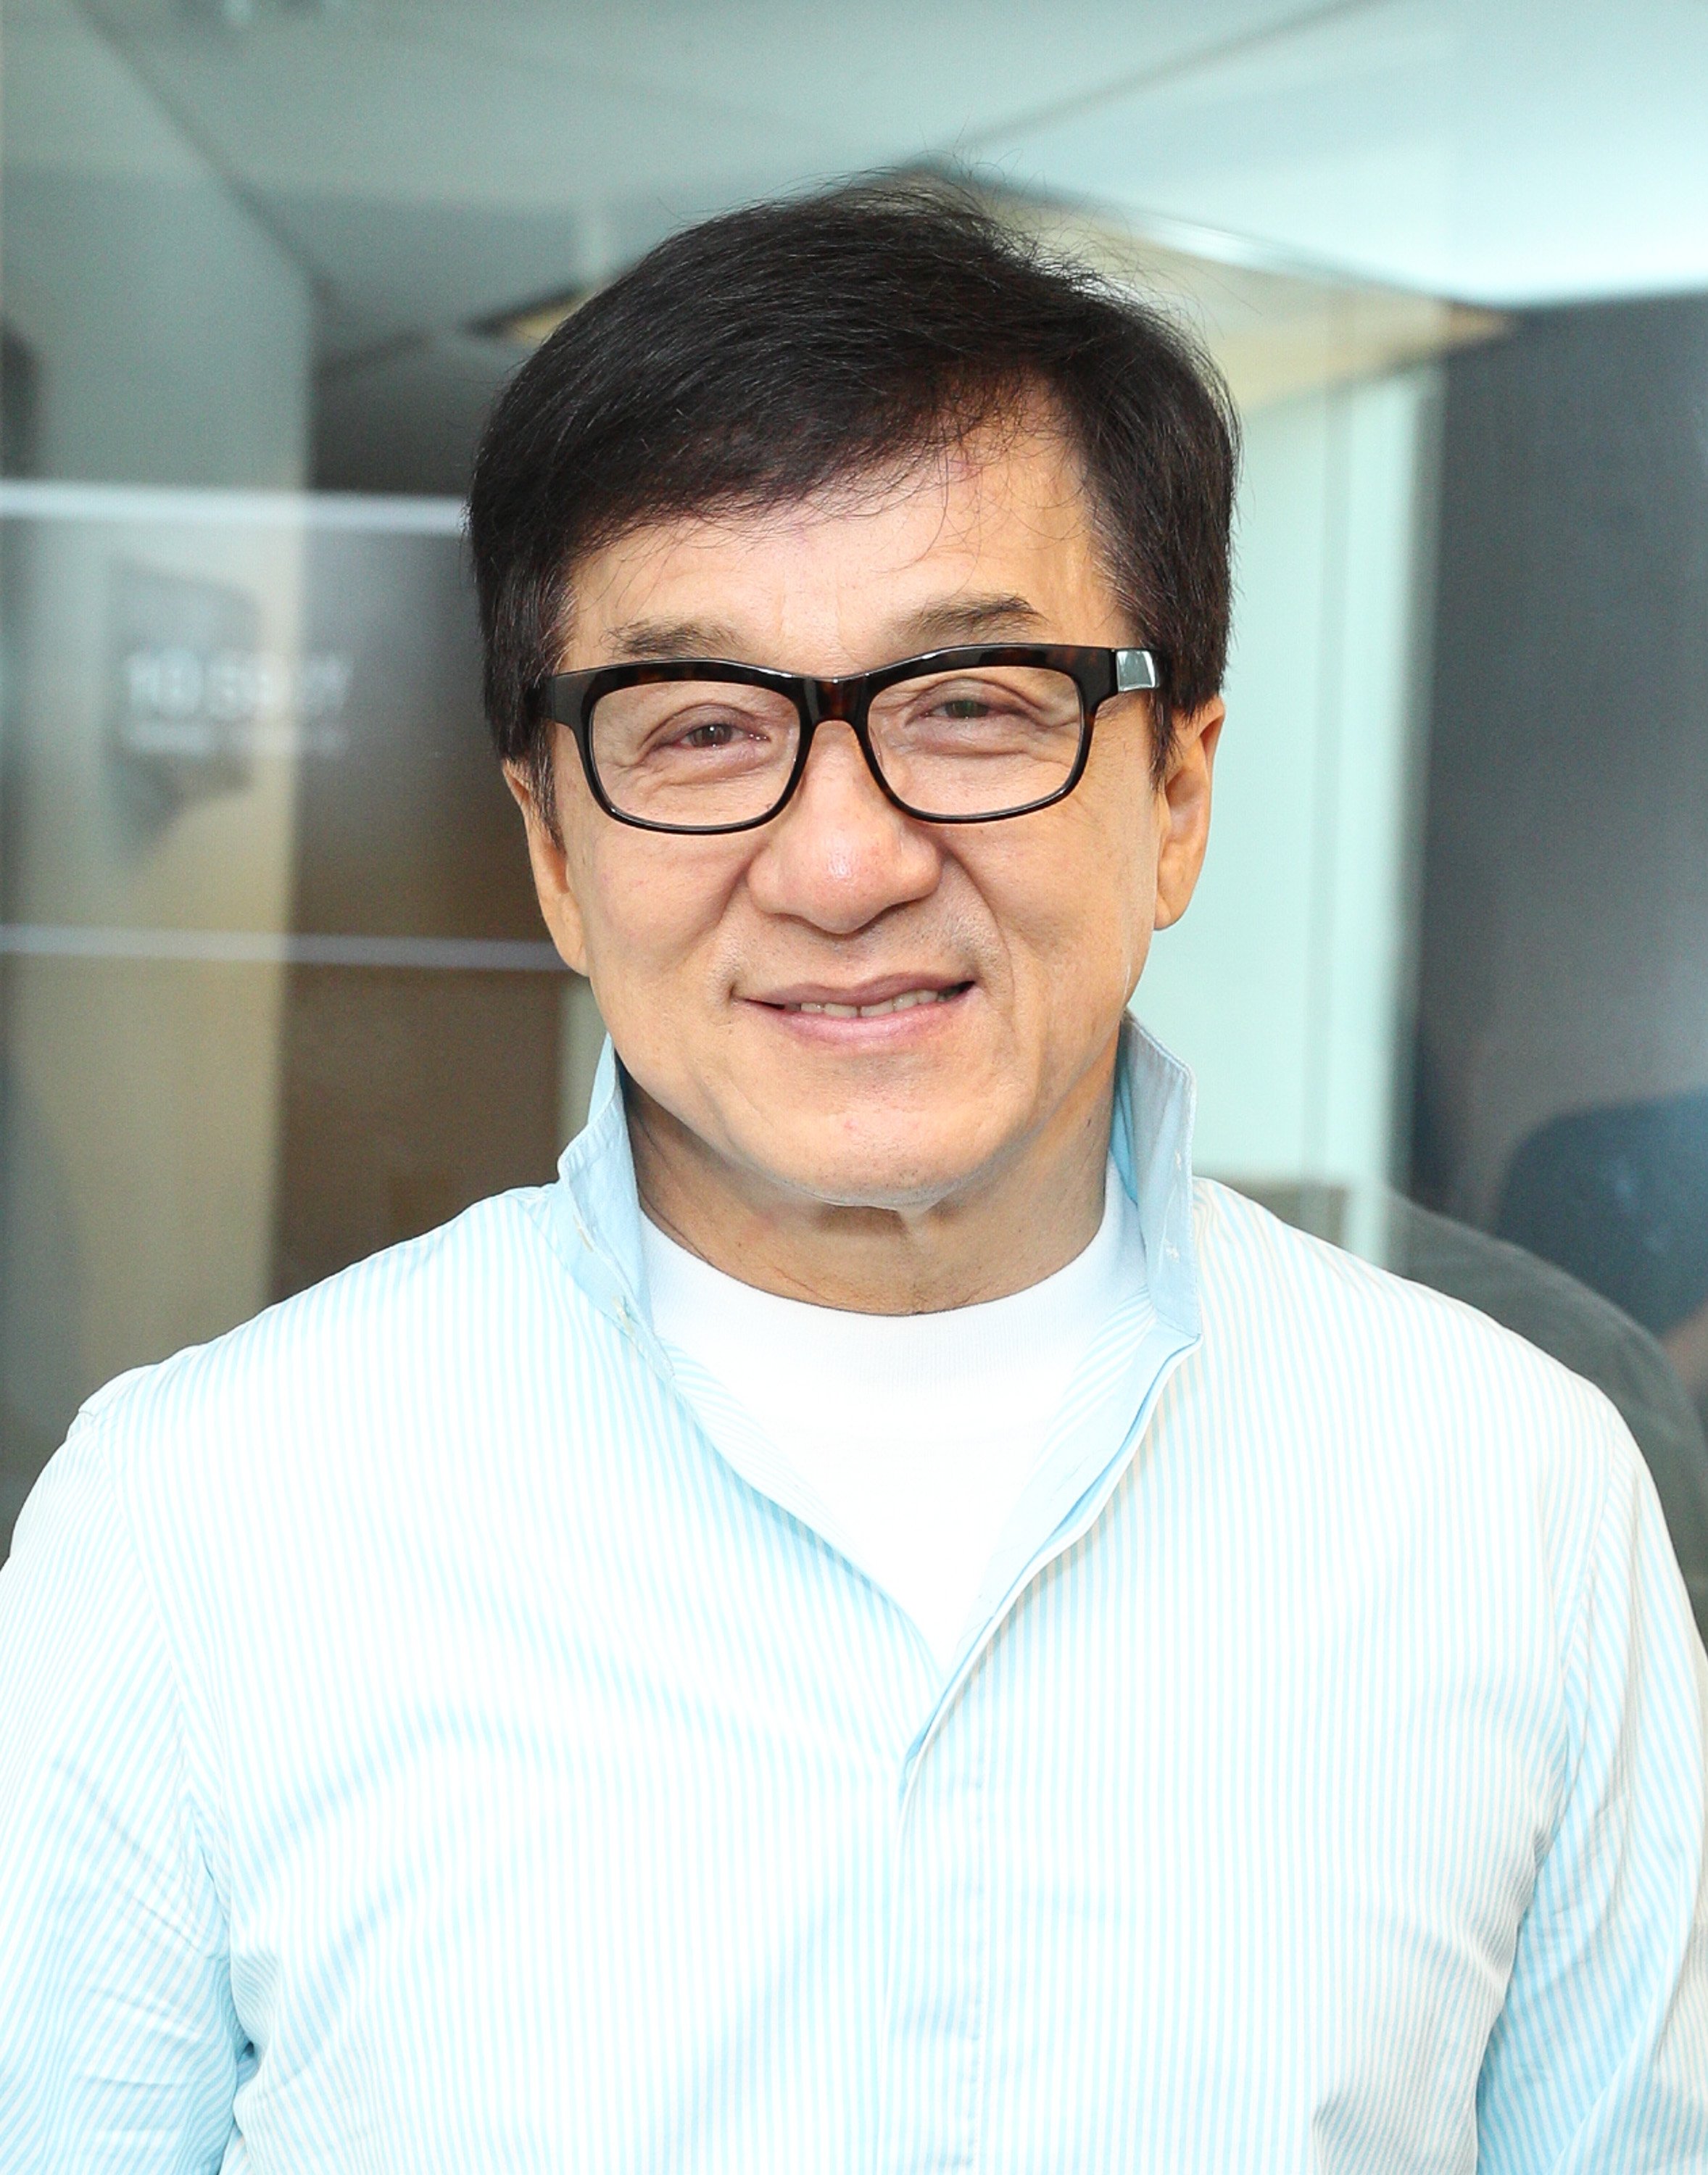 Jackie Chan visits at SiriusXM Studios on October 10, 2017 in New York City | Source: Getty Images